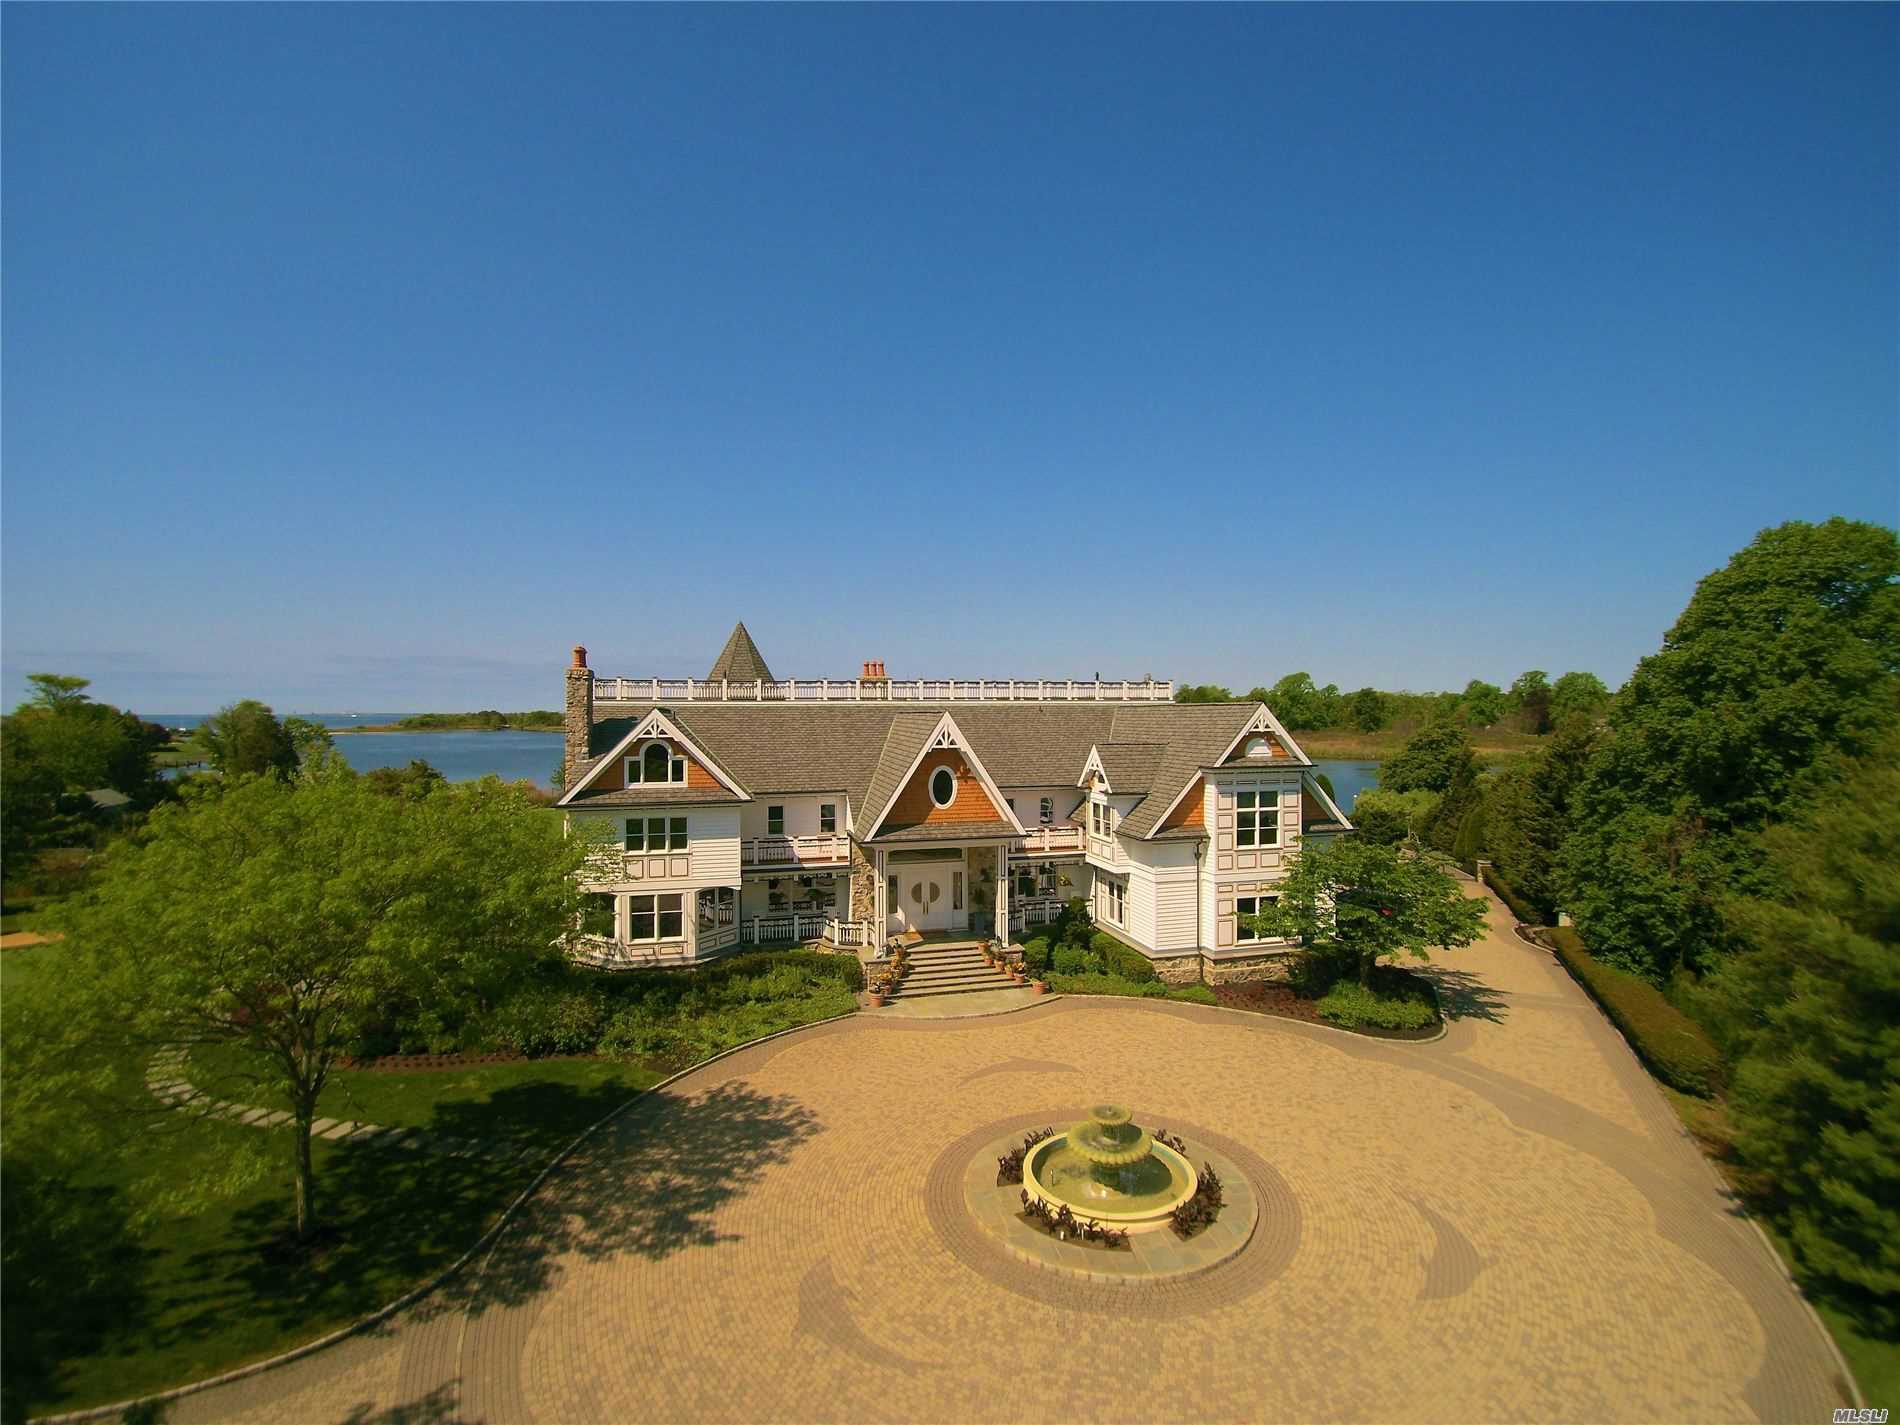 Story Book Mansion on The Champlin River, across from Seatuck Nature Preserve.3 Stories w/ 60&rsquo; Widows Walk Accessible from 2 Story Master En Suite. Meticulously maintained at all times! Contractors House, No Expense Spared! Gated on Cul-de-Sac with Expansive Circular Driveway. Thoughtfully Positioned on Property for Ultimate Panoramic Water Views. True Chefs Kitchen w/Stone Wall Cooking Station. 50x60 Deep Water Slip w/227&rsquo;Bulkhead. Enchanted, Magical Home and Property.